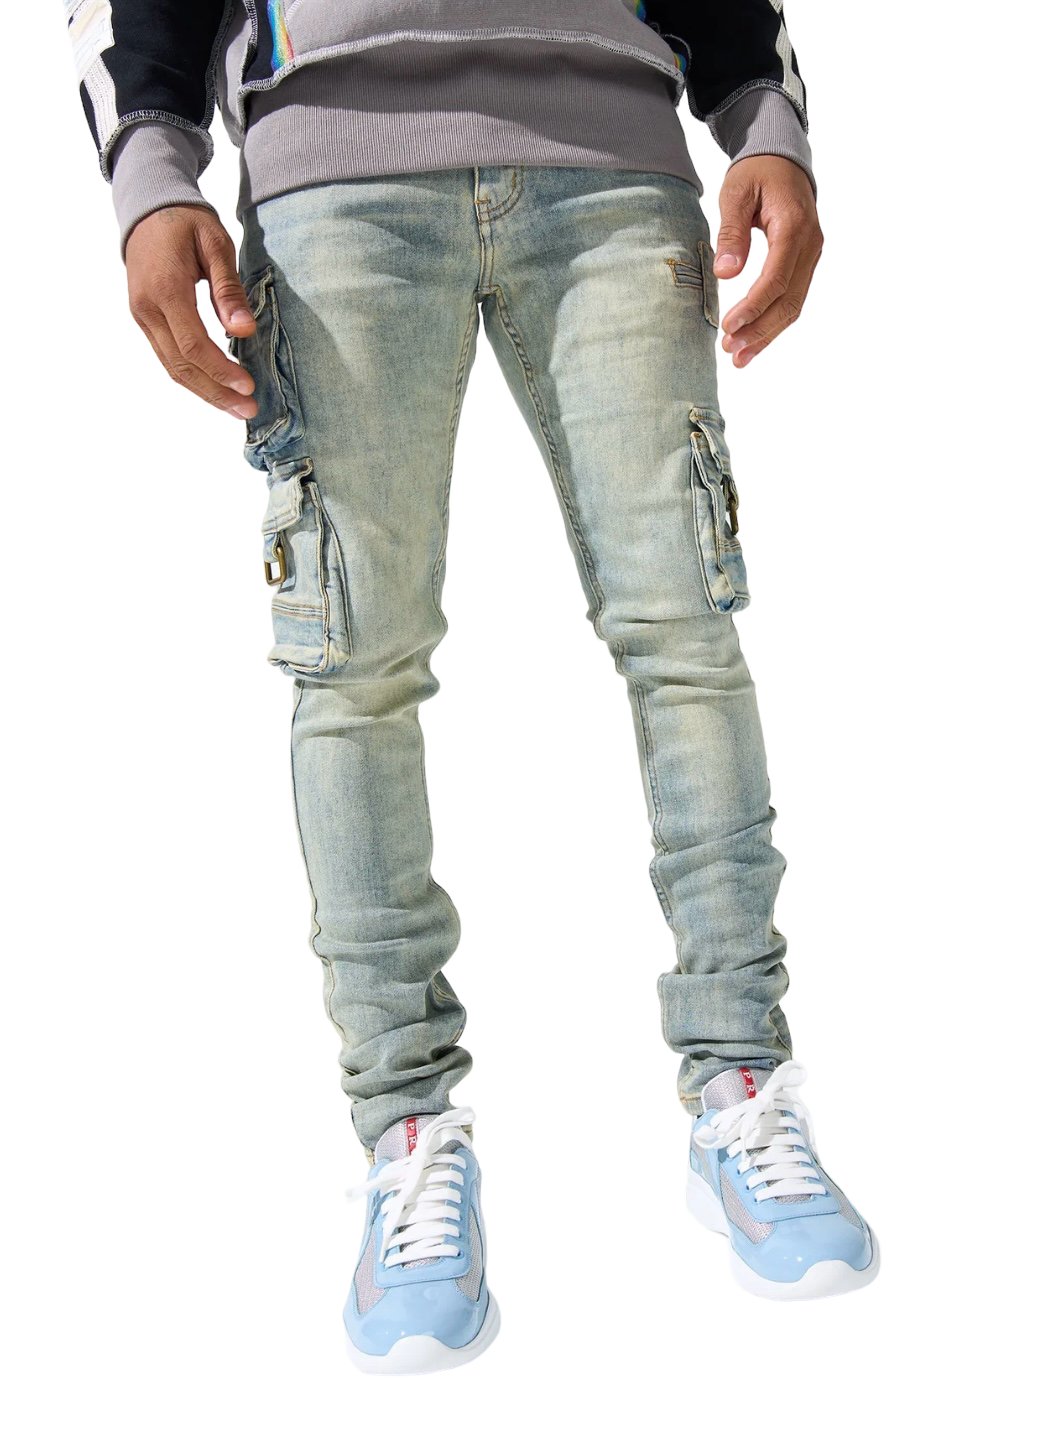 SERENEDE NEW EARTH 2.0 CARGO JEANS